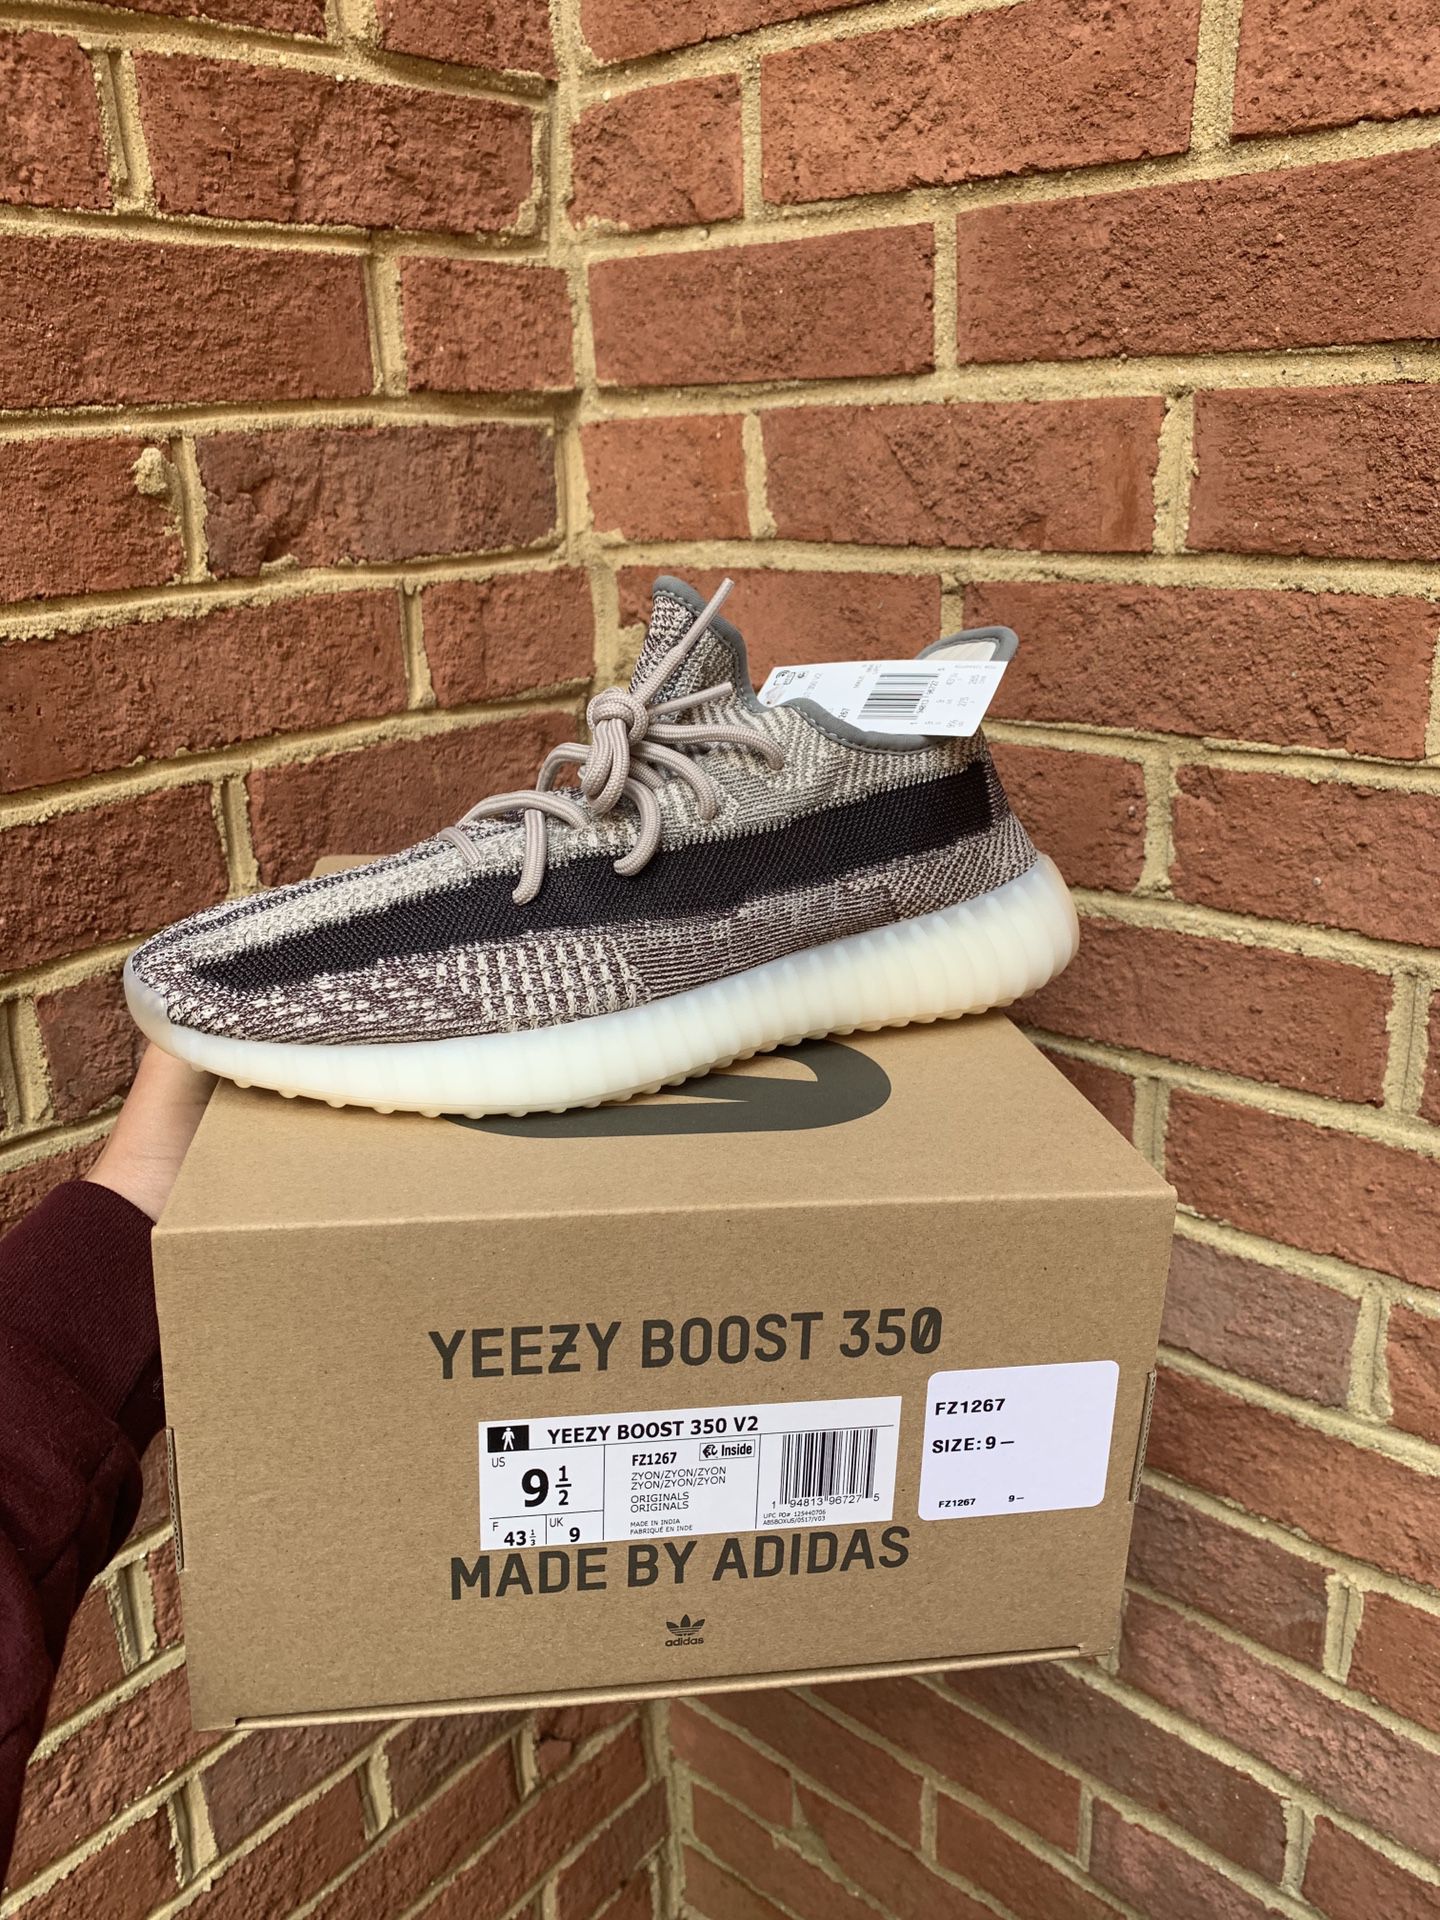 YEEZY ZYON SIZE 9.5 AND 7